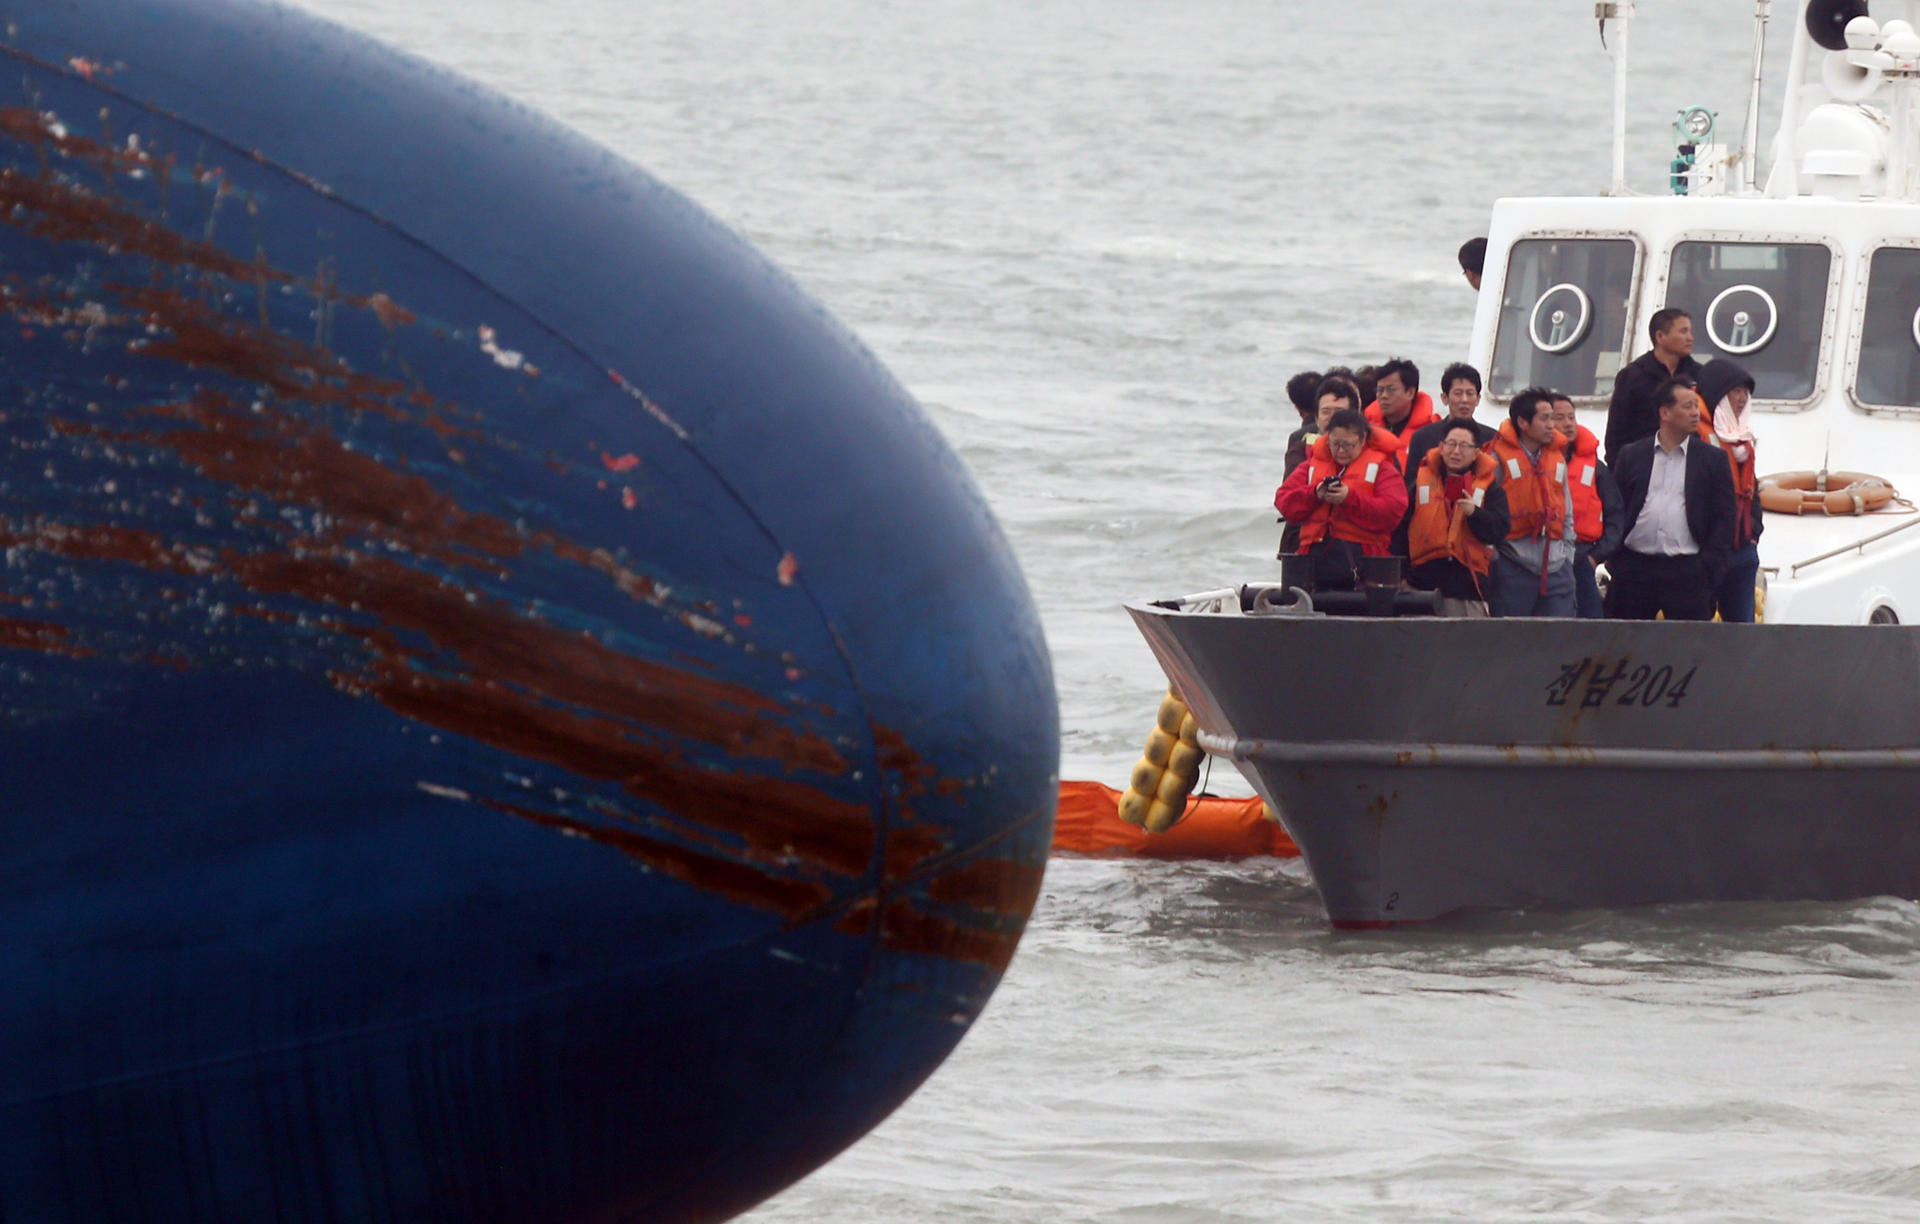 Relatives of missing passengers visit the area where the ferry sank off Byeongpung island. Photo: AFP